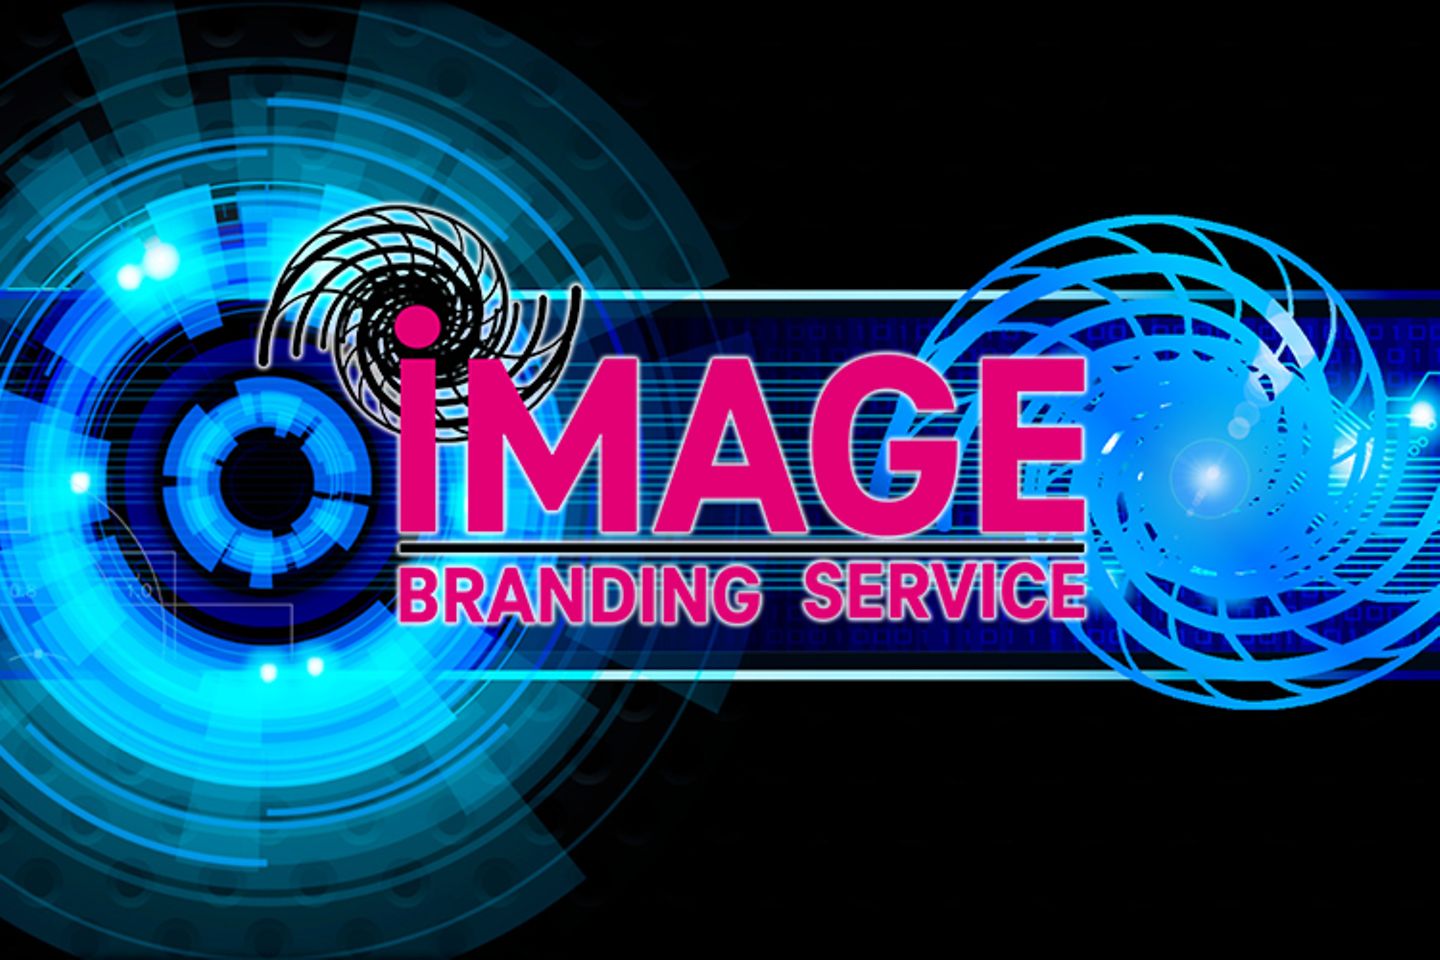 Logo of the Image Branding Service by T-Systems